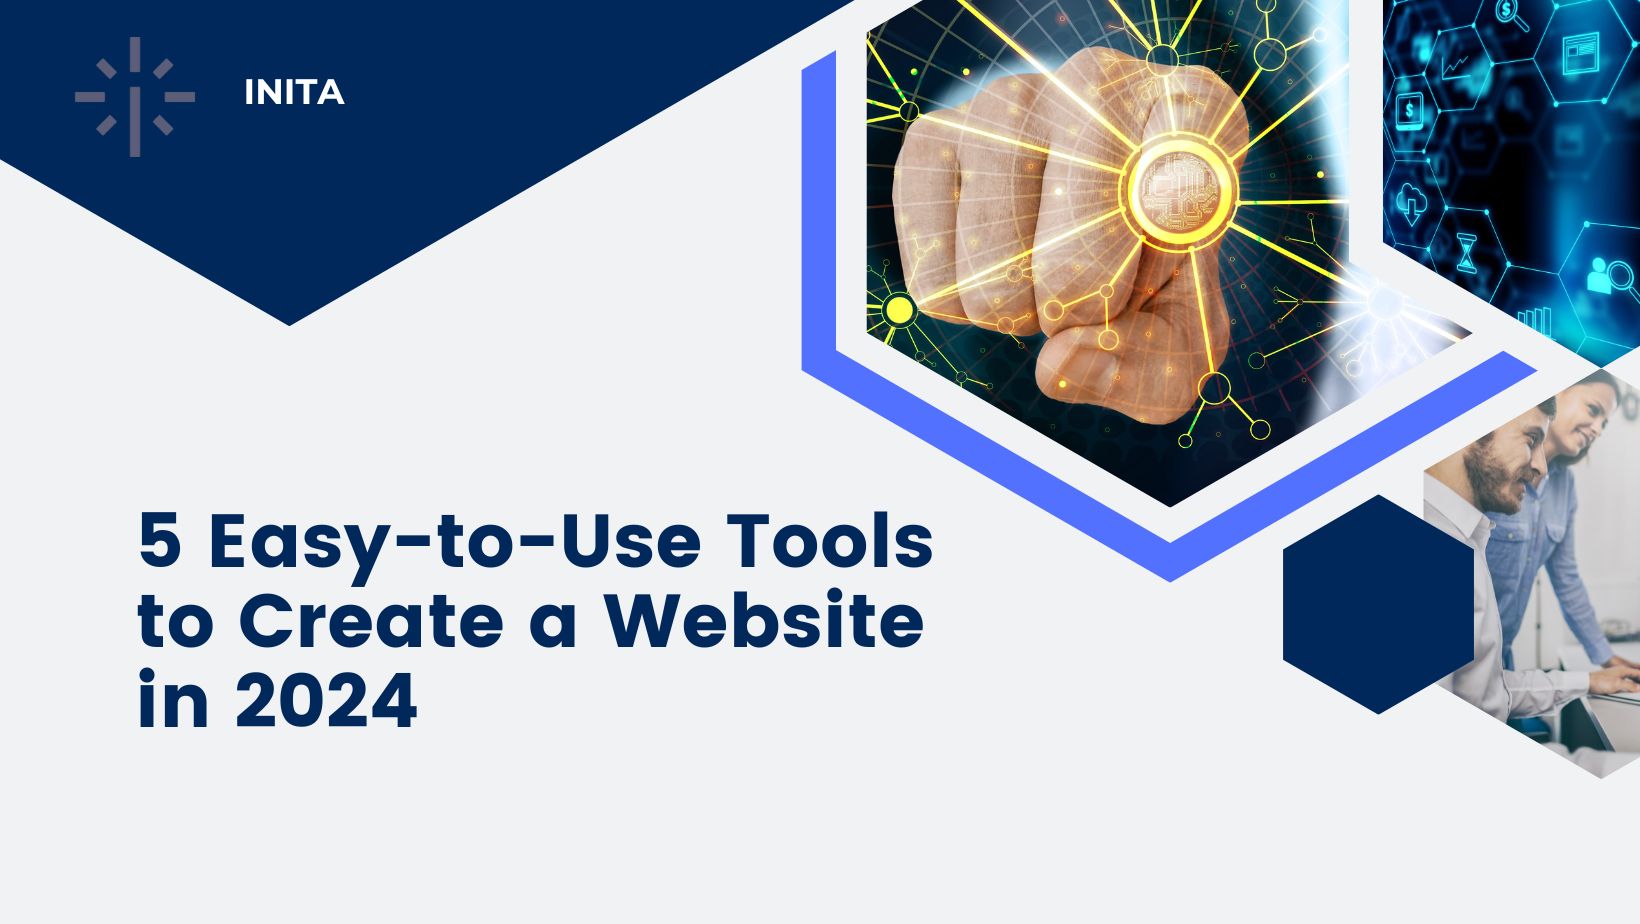 5 Easy-to-Use Tools to Create a Website in 2024